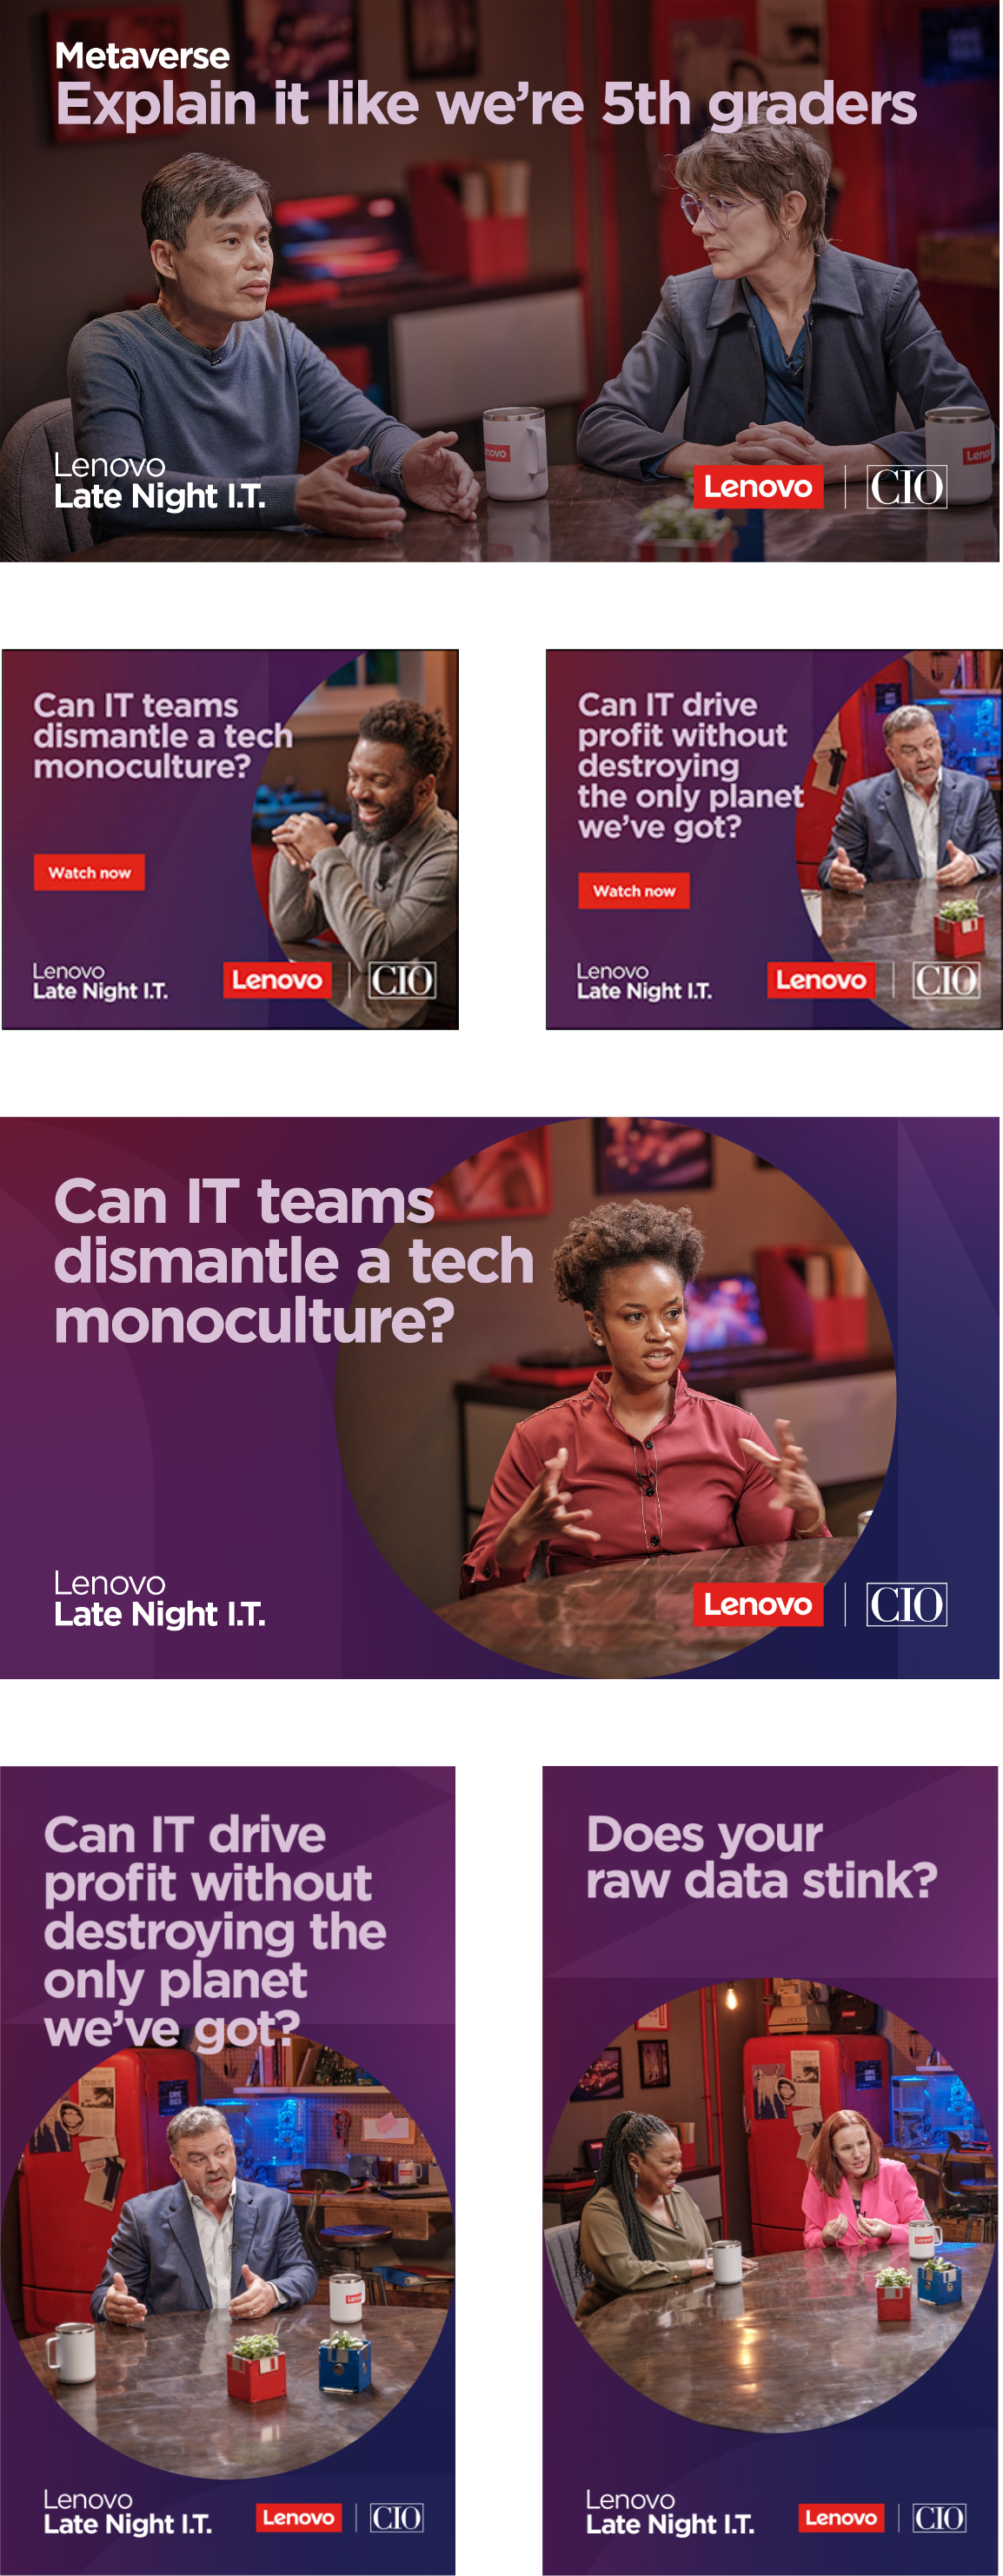 Collage 2 of Lenovo Late Night I.T. episode ads.